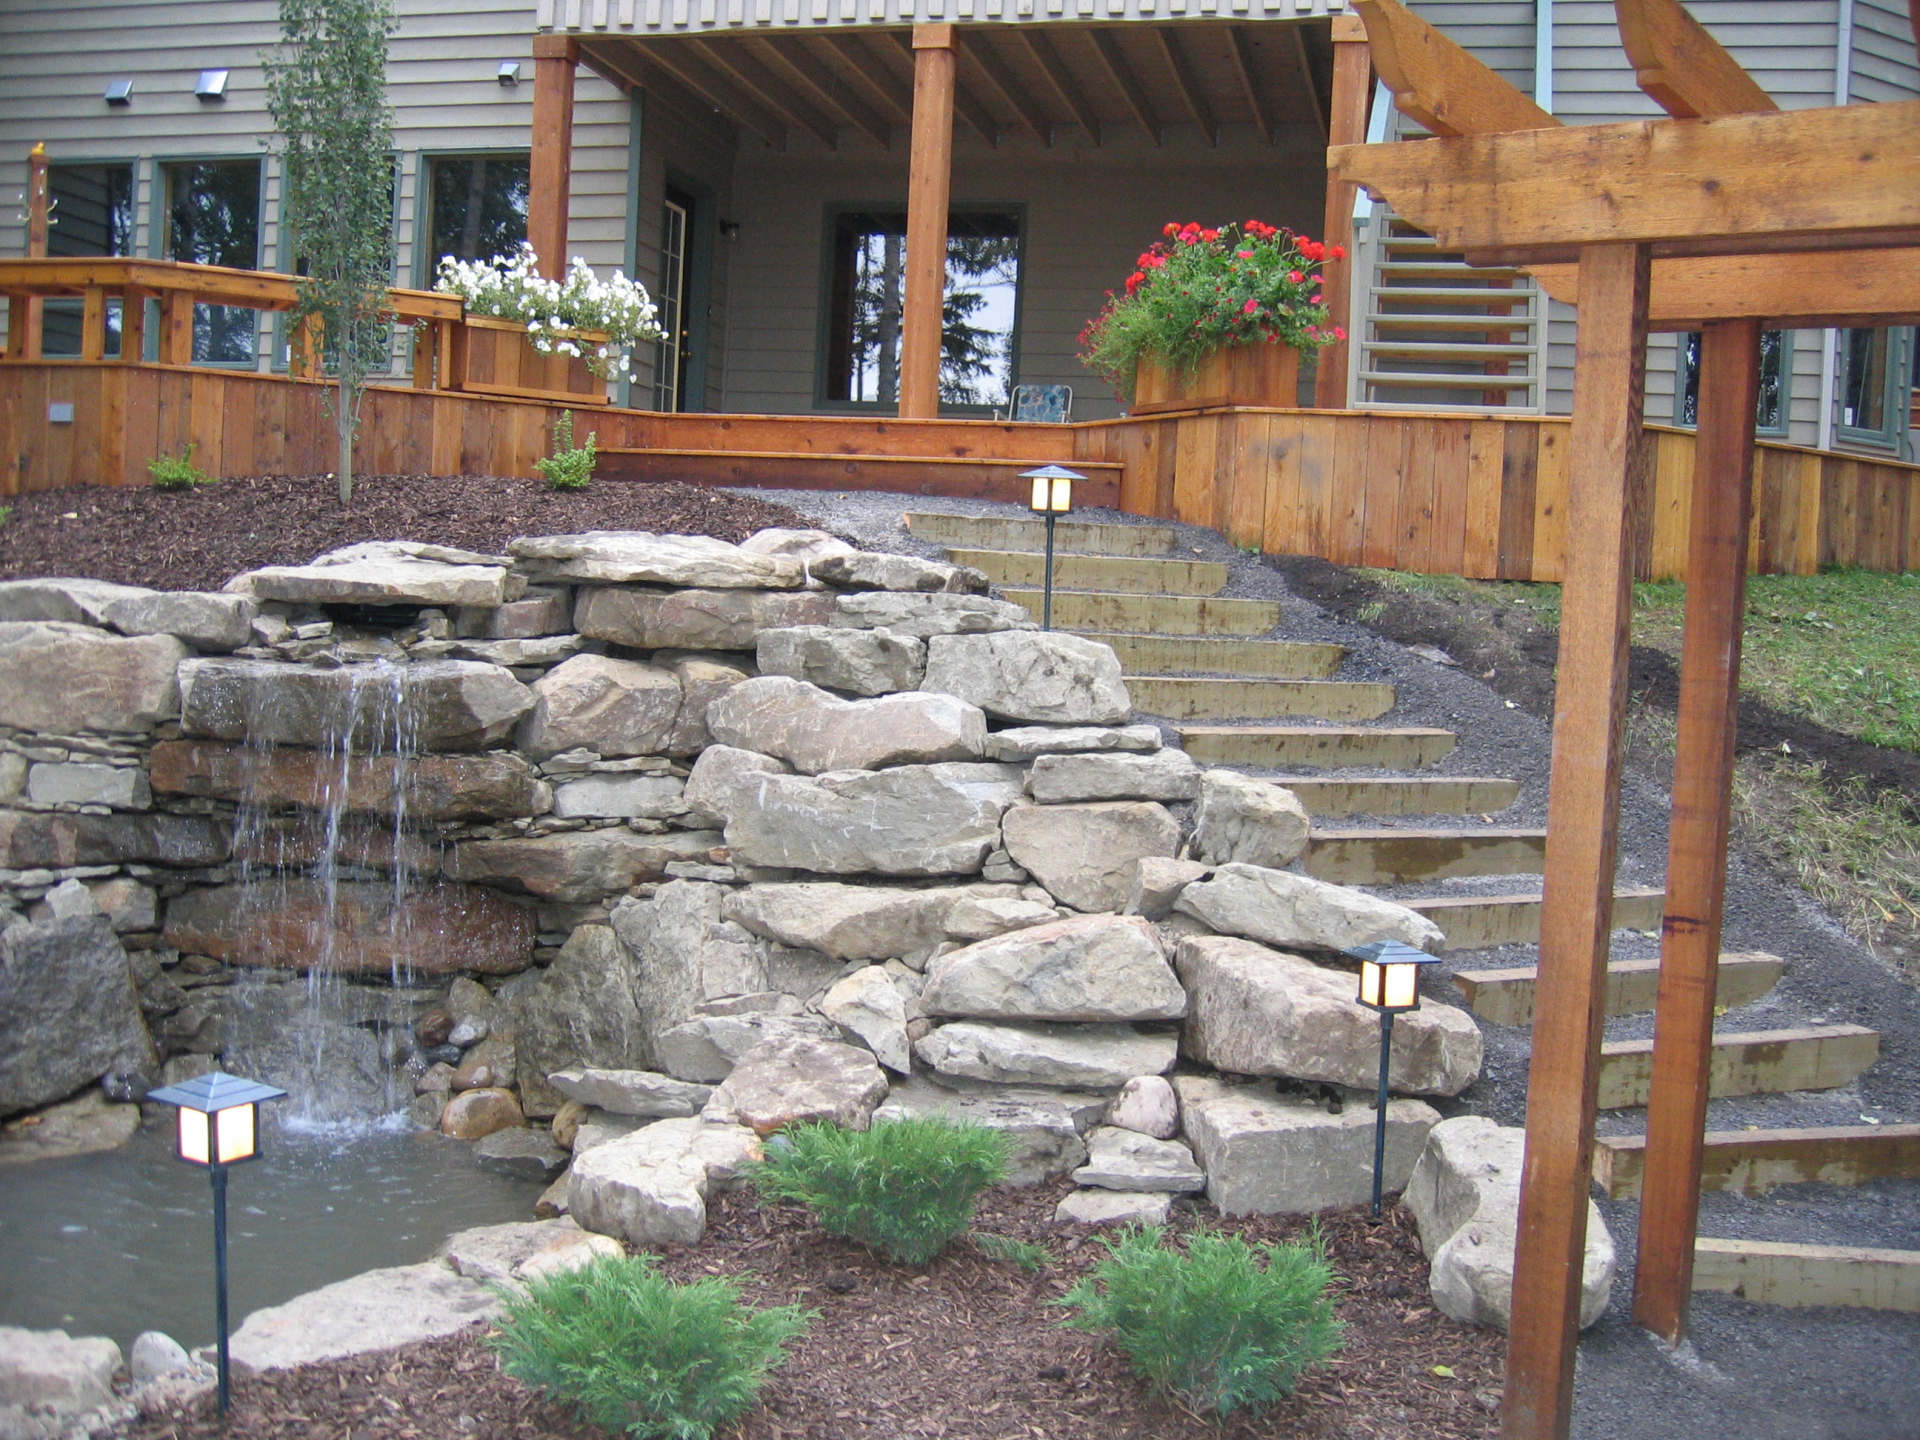 Vancouver Island landscapers